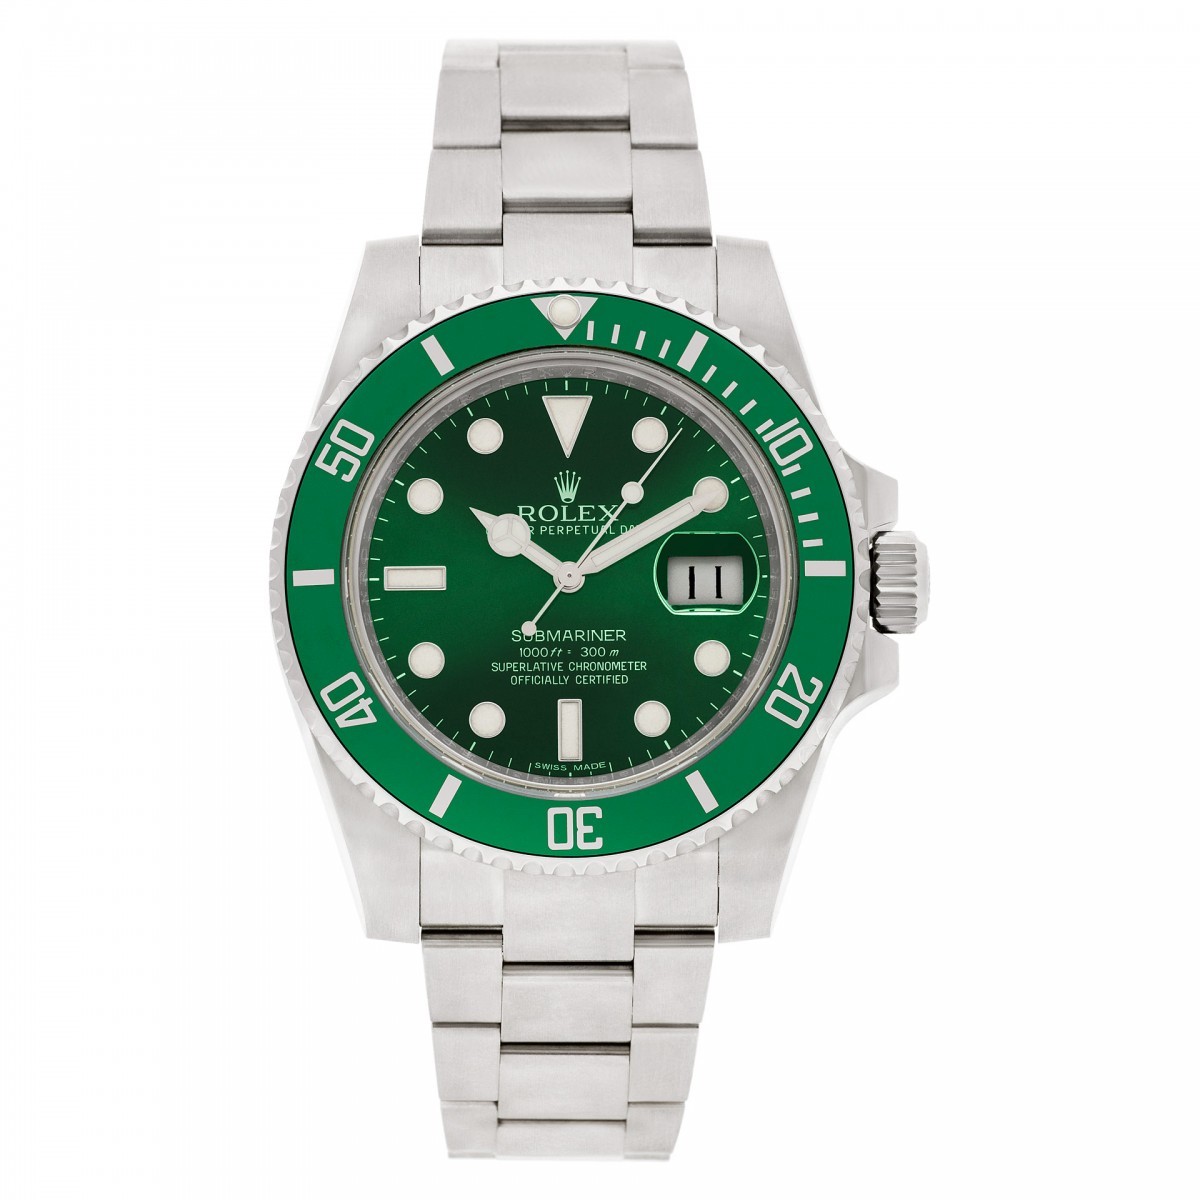 Authentic Rolex Watches - Buy \u0026 Sell